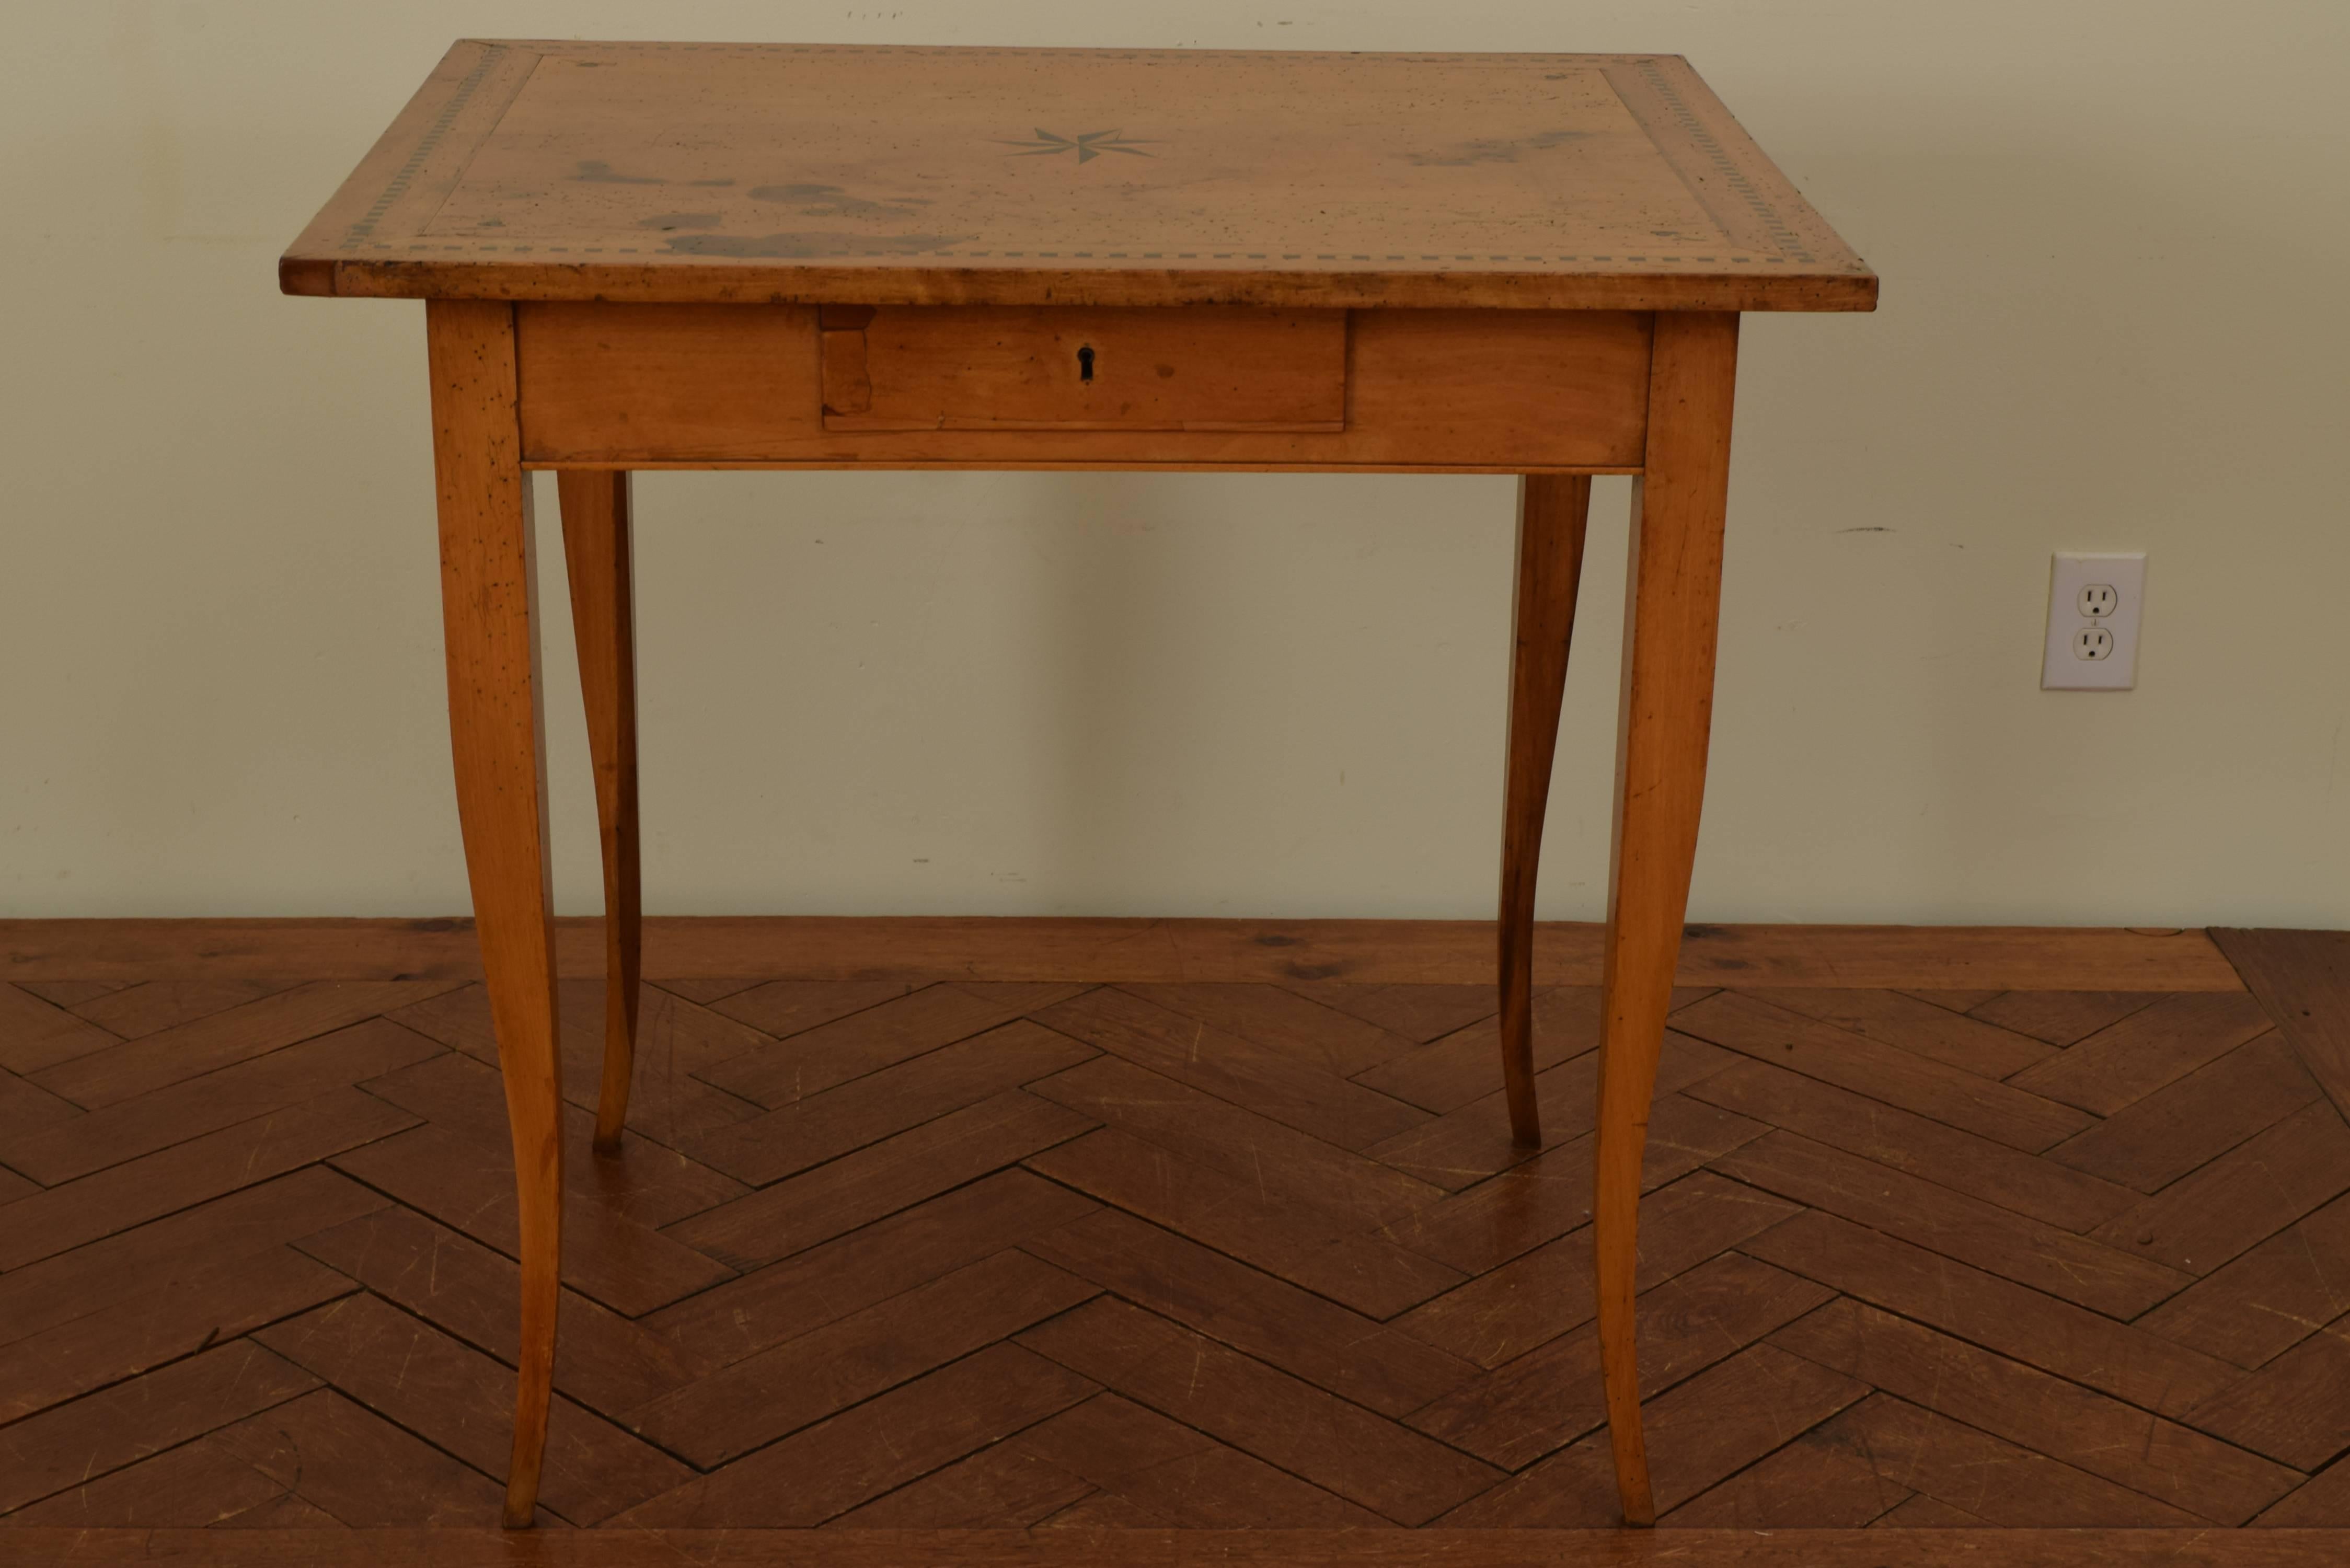 Neoclassical one-drawer table. The rectangular top with an ebonized block border, clover leaves in the corners and a centered star medallion, the apron housing one locking drawer, raised on slightly cabriole legs.